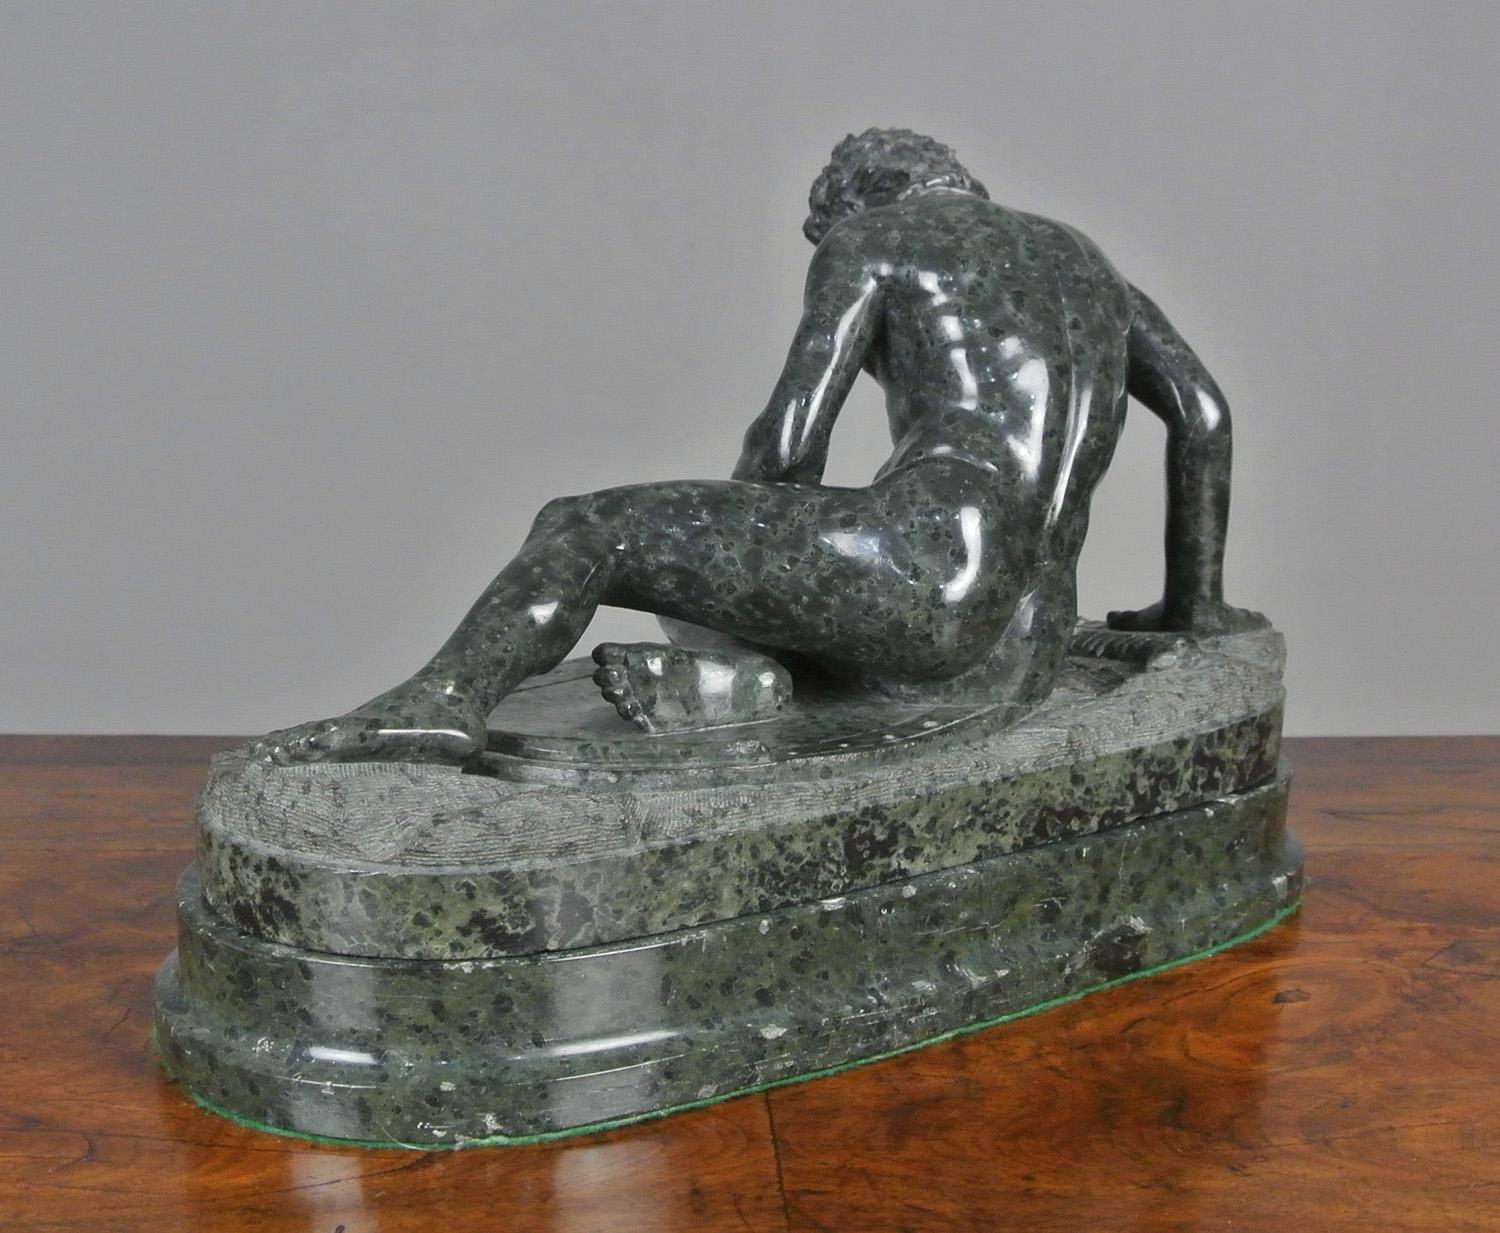 19th Century Early, Large and Fine Grand Tour Serpentine Sculpture of the Dying Gaul c. 1850 For Sale